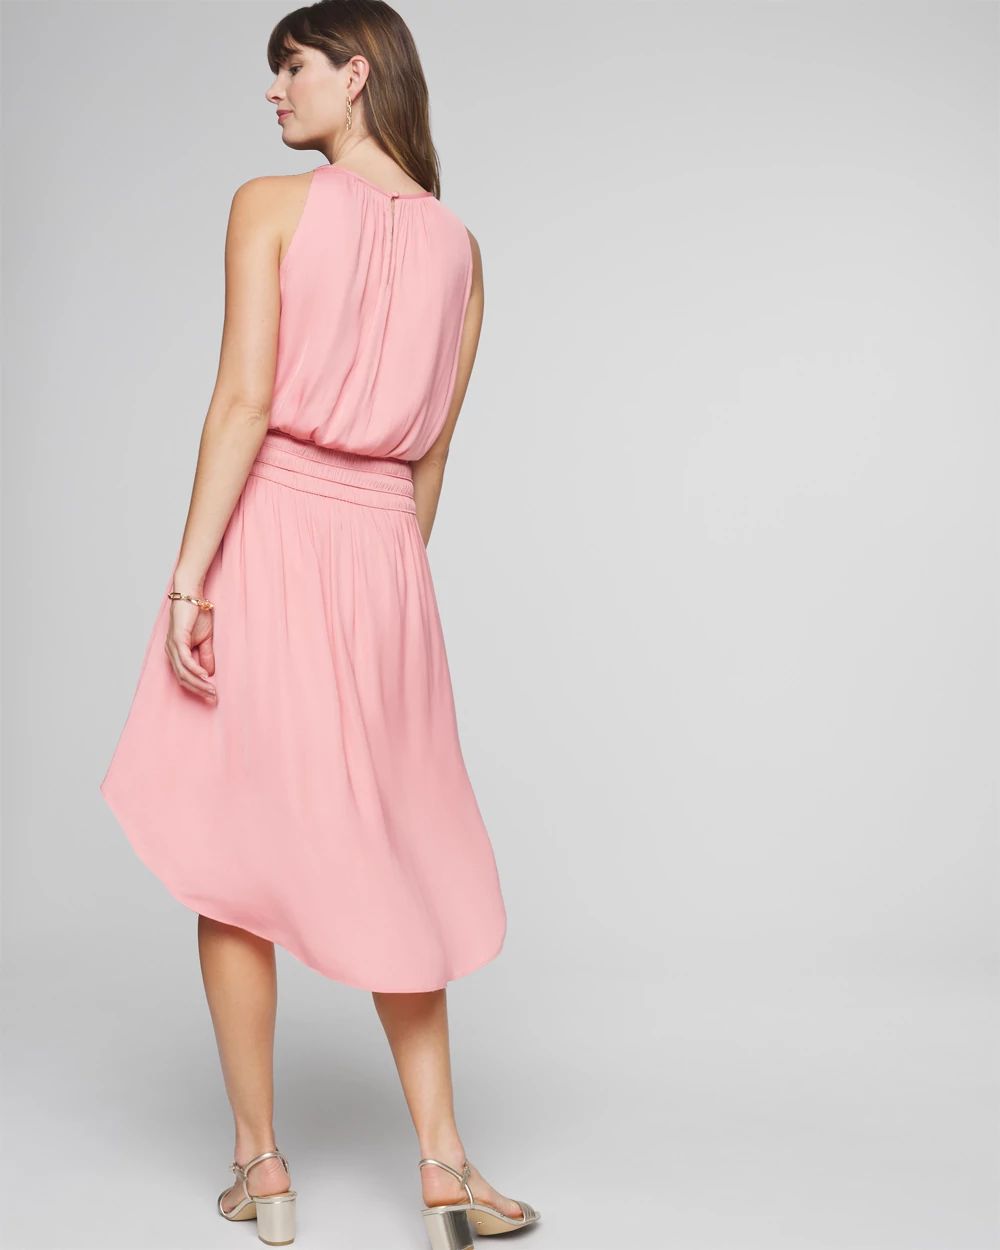 Petite High-Neck Smocked Midi Dress click to view larger image.